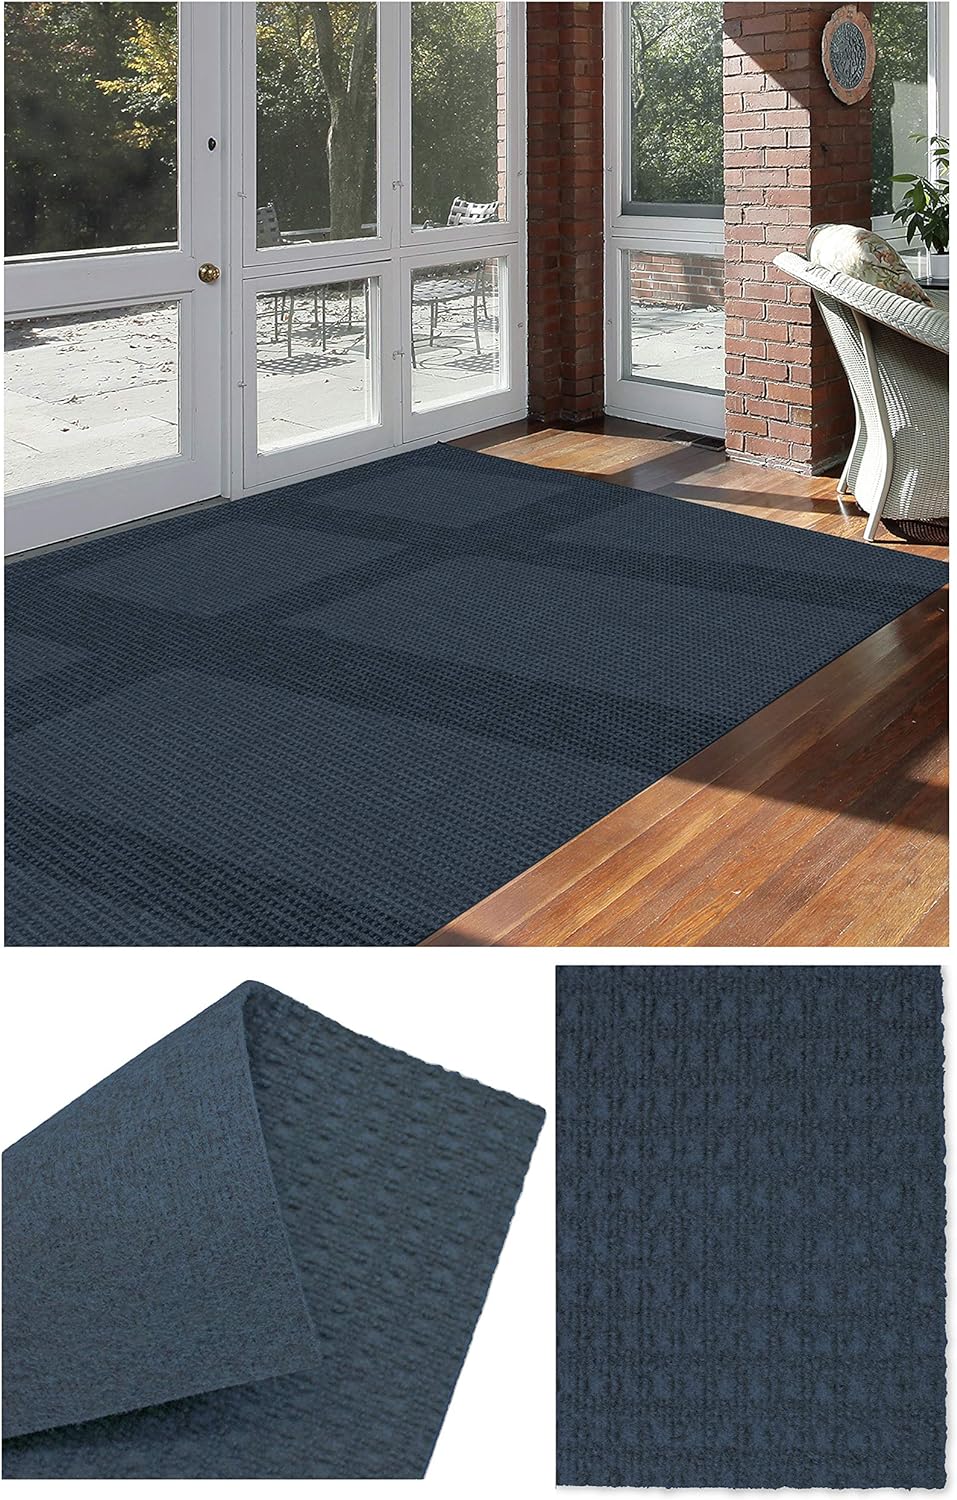 Koeckritz Rugs Soft and Durable Interlace Indoor - Outdoor Area Rugs Lightweight and Flexible (Color: Denim Green)